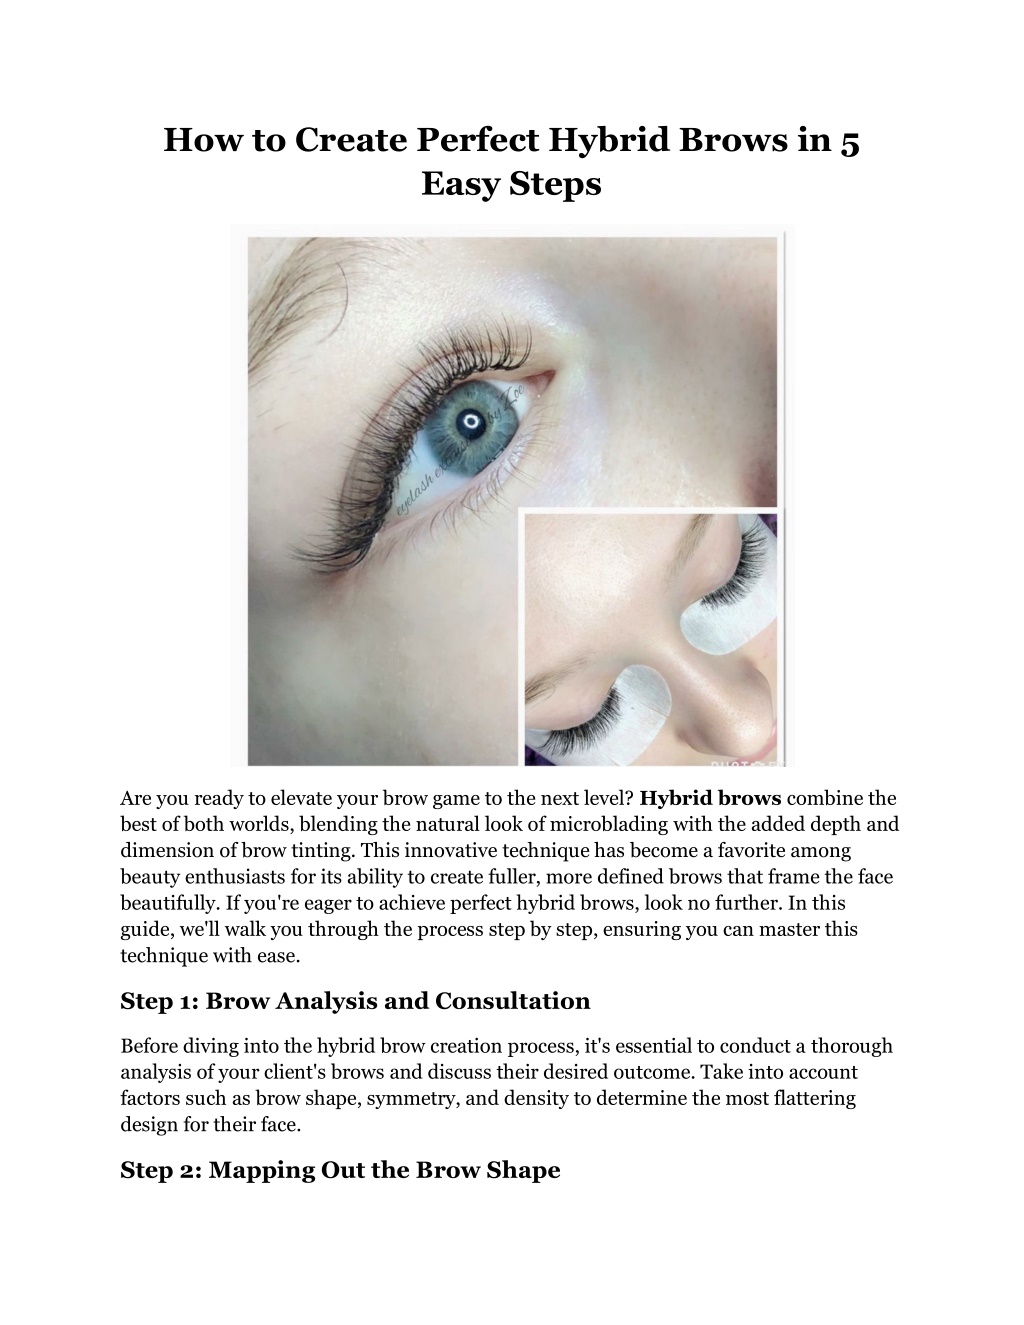 how to create perfect hybrid brows in 5 easy steps l.w